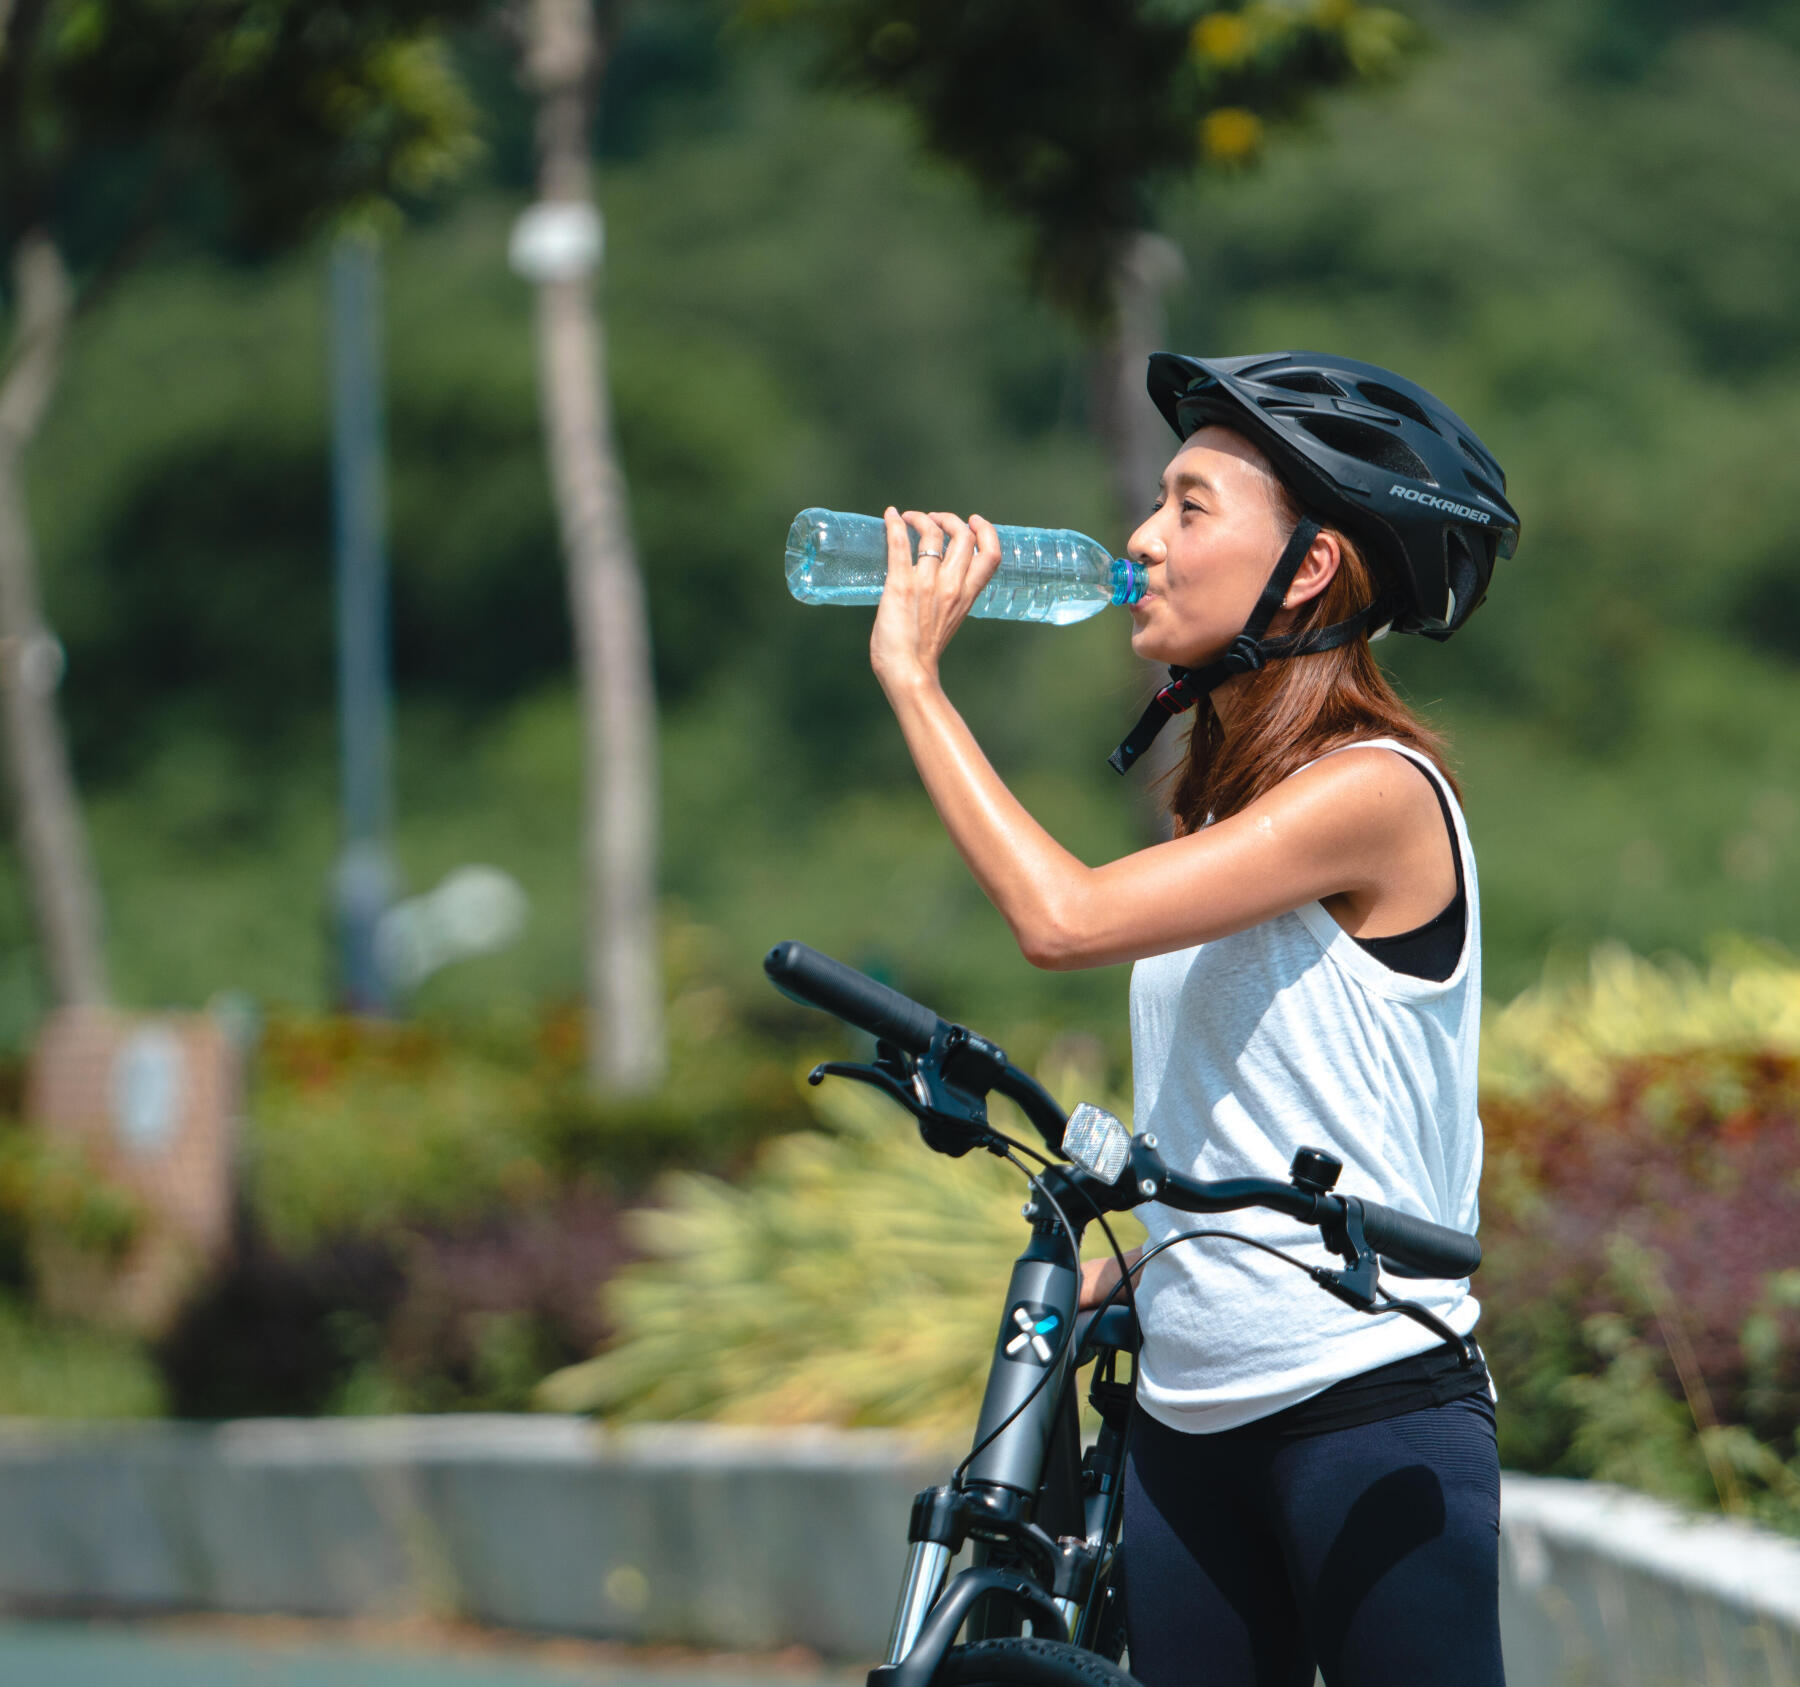 Carry enough water and drinks during cycling